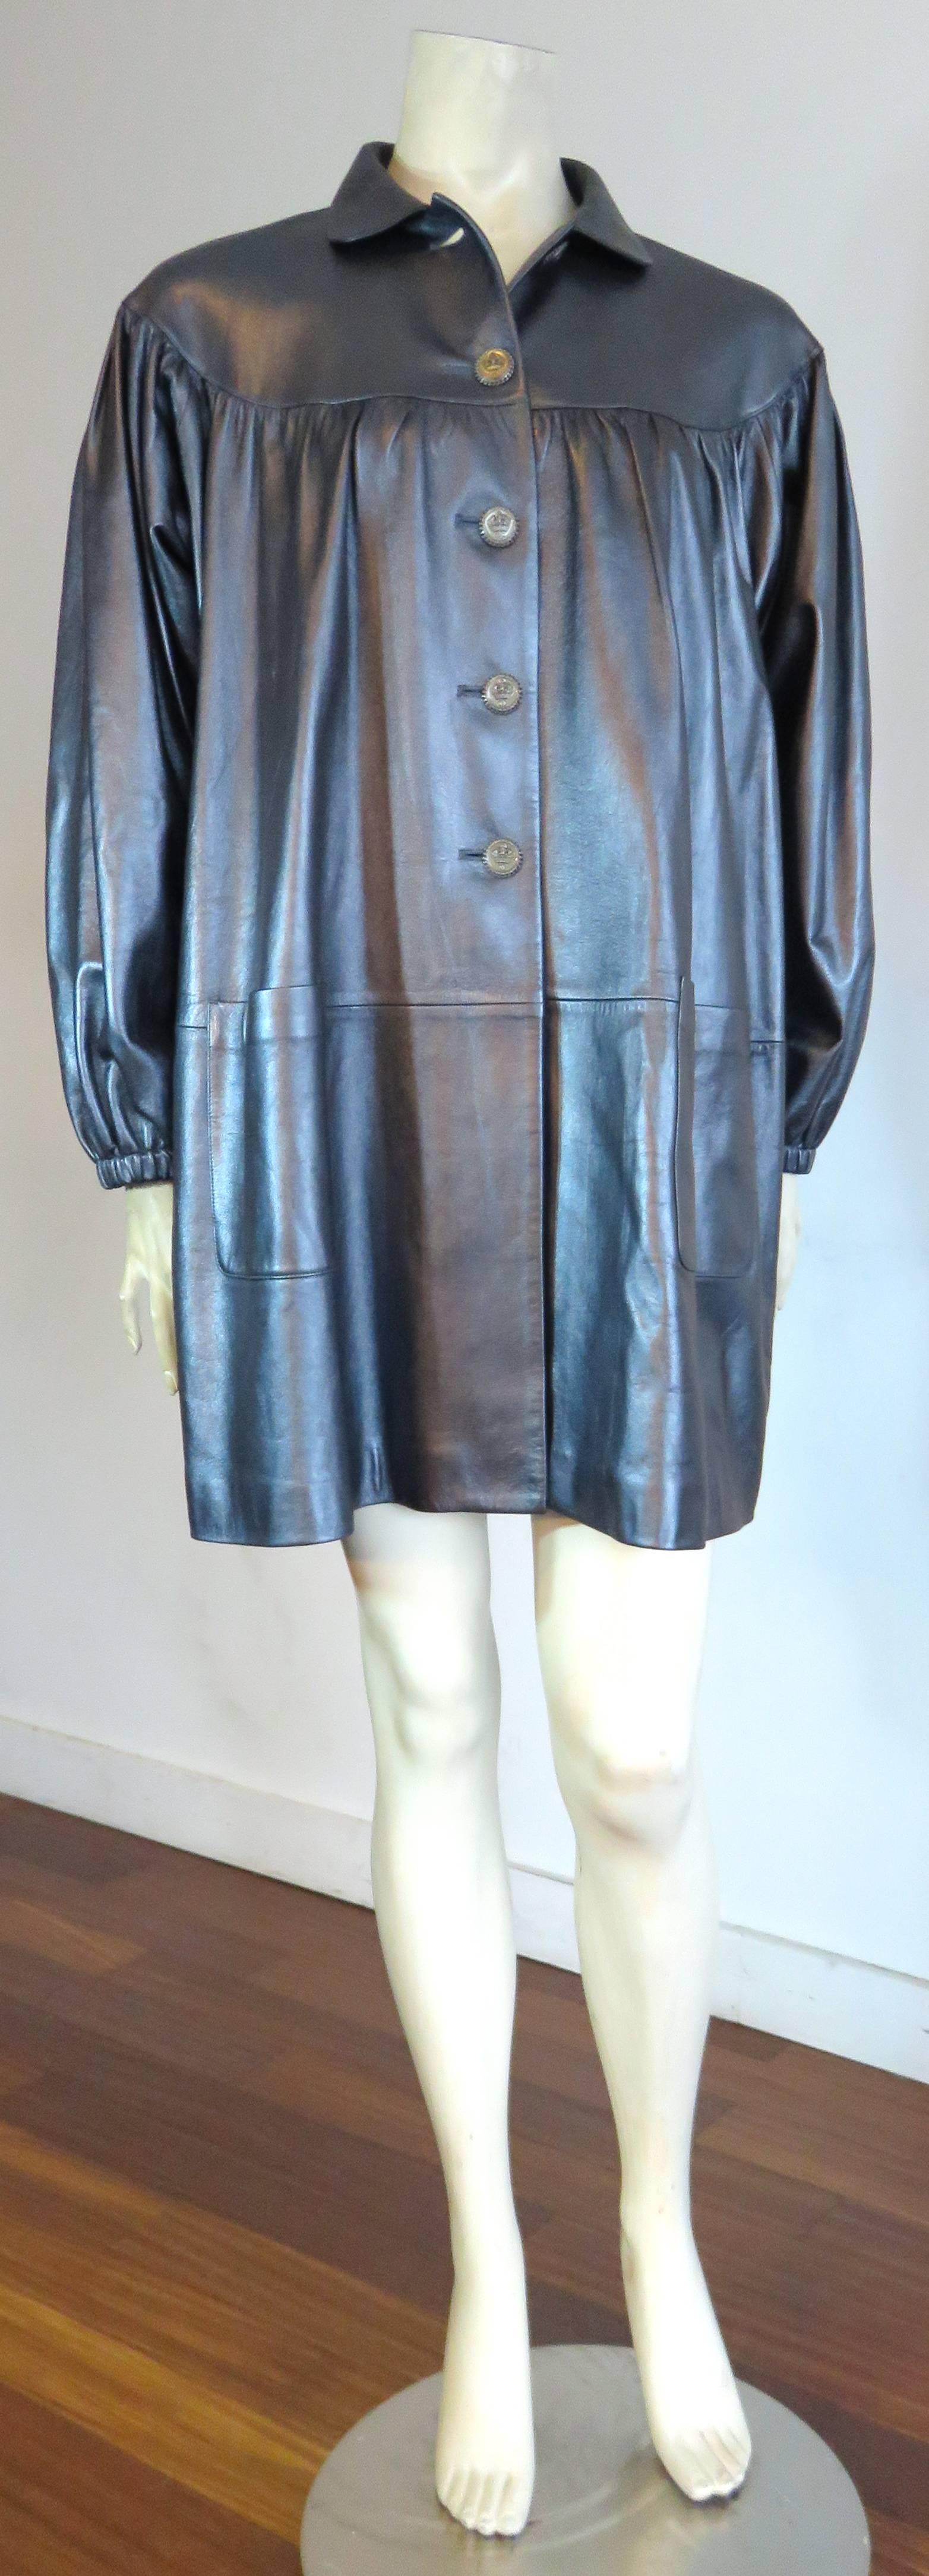 Worn once, and in 'like new' condition, CHANEL PARIS Pewter-finished, lambskin, leather coat.

Ultra-soft, and supple, lambskin leather fabrication featuring shimmering, pewter top finish.

Crown logo engraved buttons at front.

This fabulous